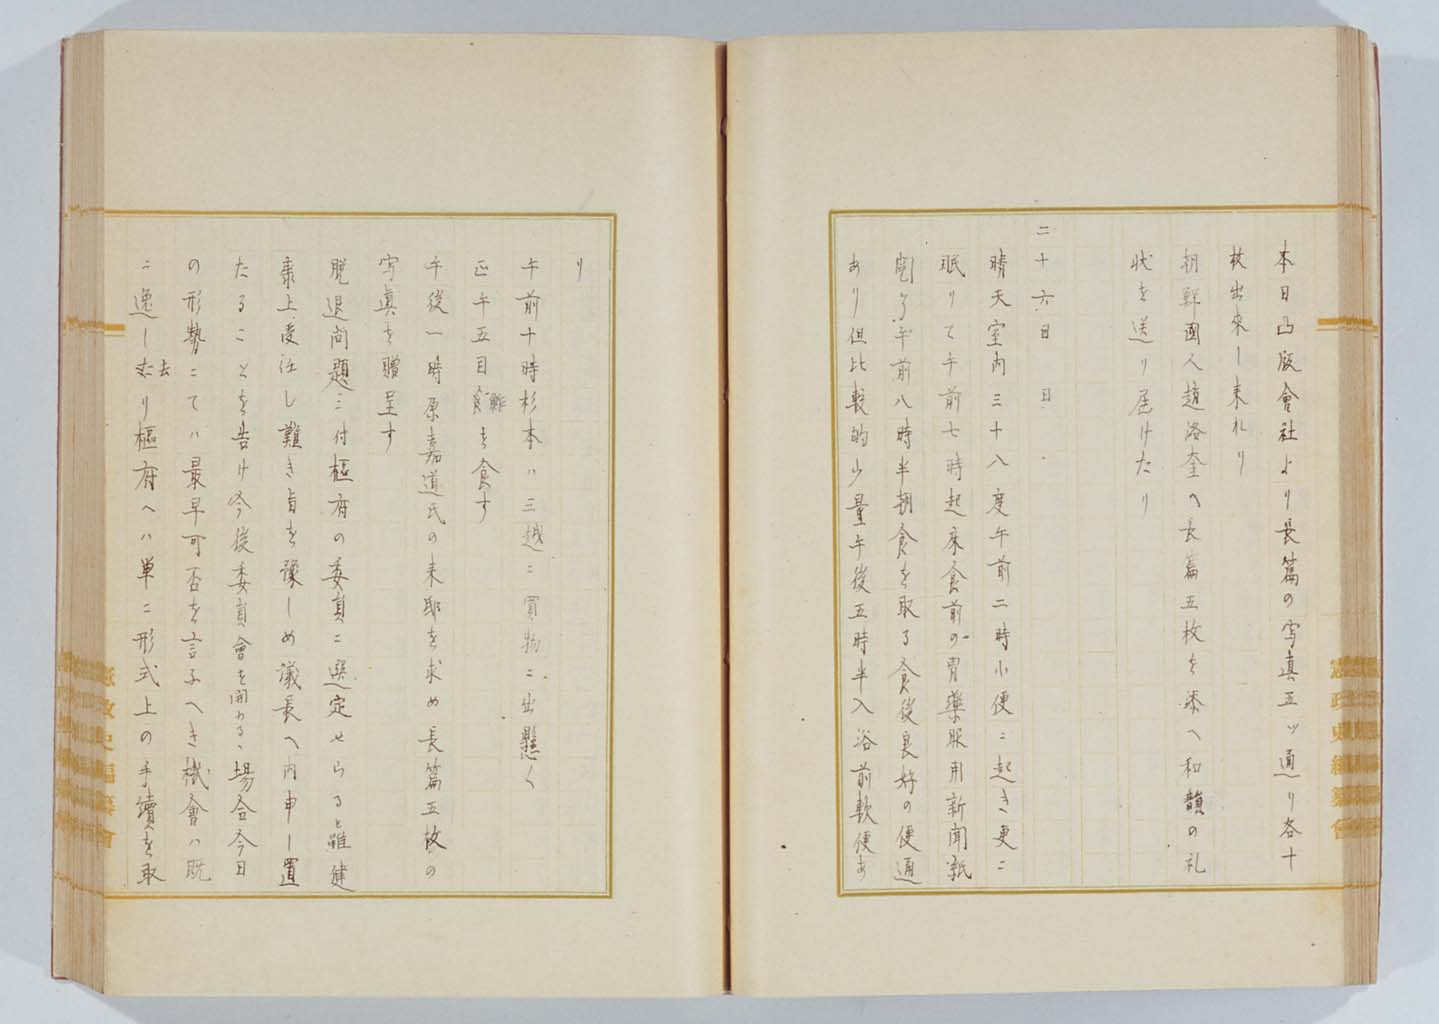 Miyoji Ito's diary ( Transcript ) February, 1933 (Showa 8) Constitutional Government Documents Collection, #632-1 ( Larger3-4 )